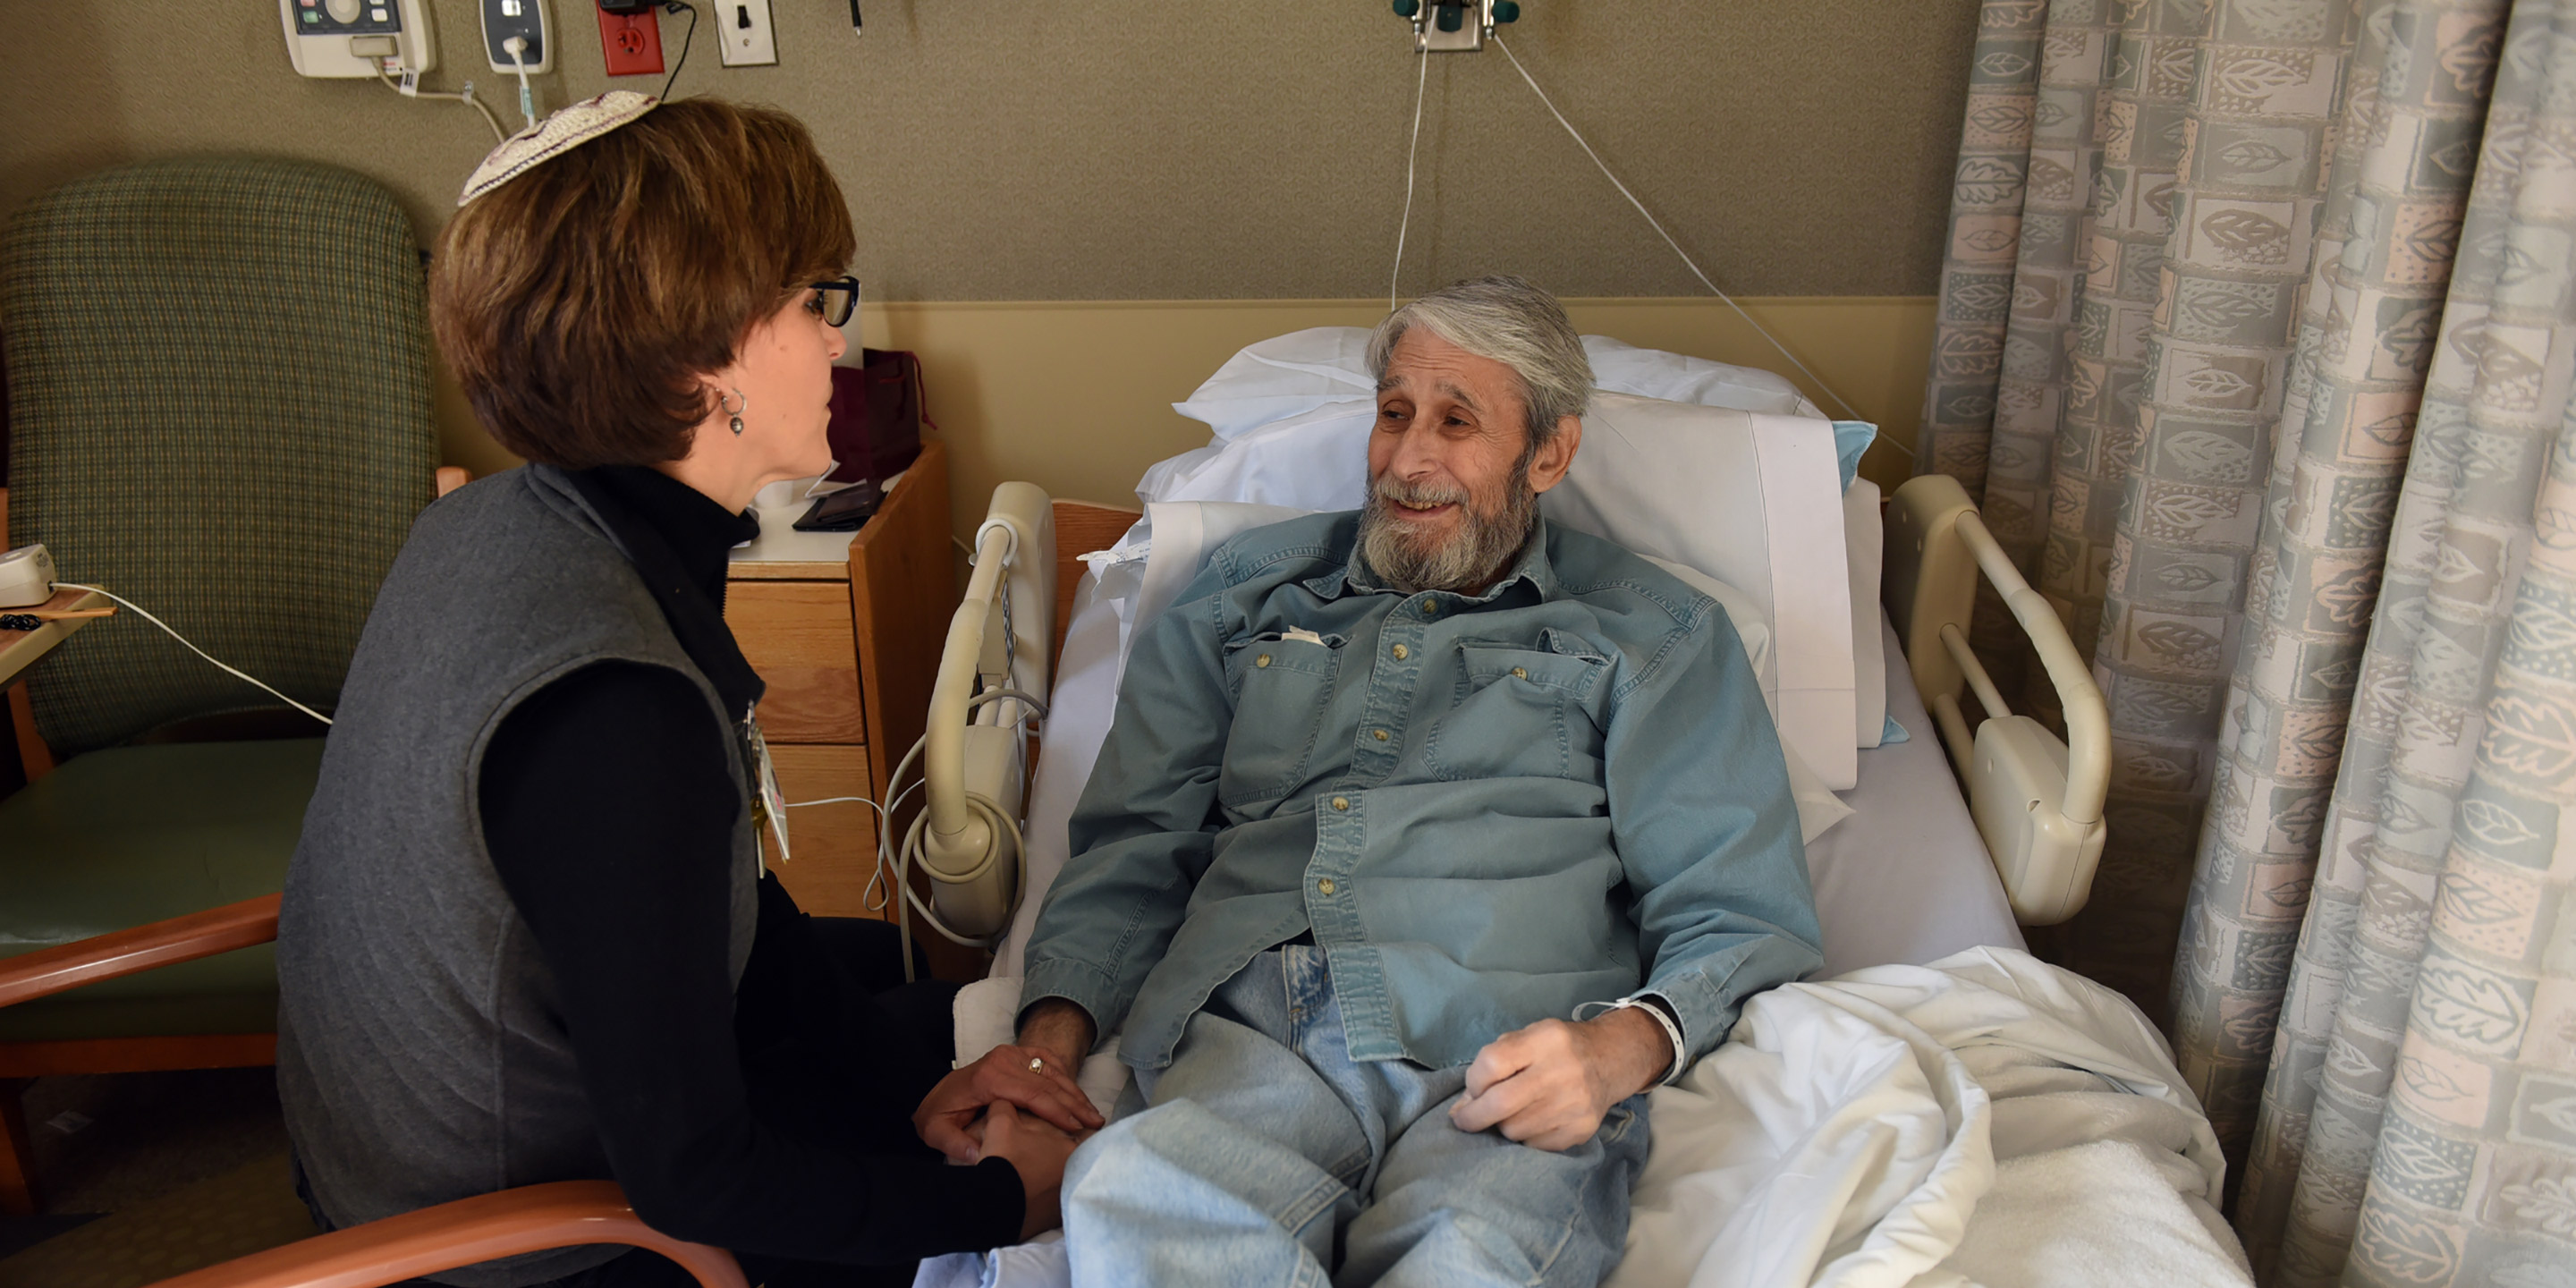 Rabbi Sara Paasche-Orlow sits and talks with a male patient while he lays in a hospital bed.